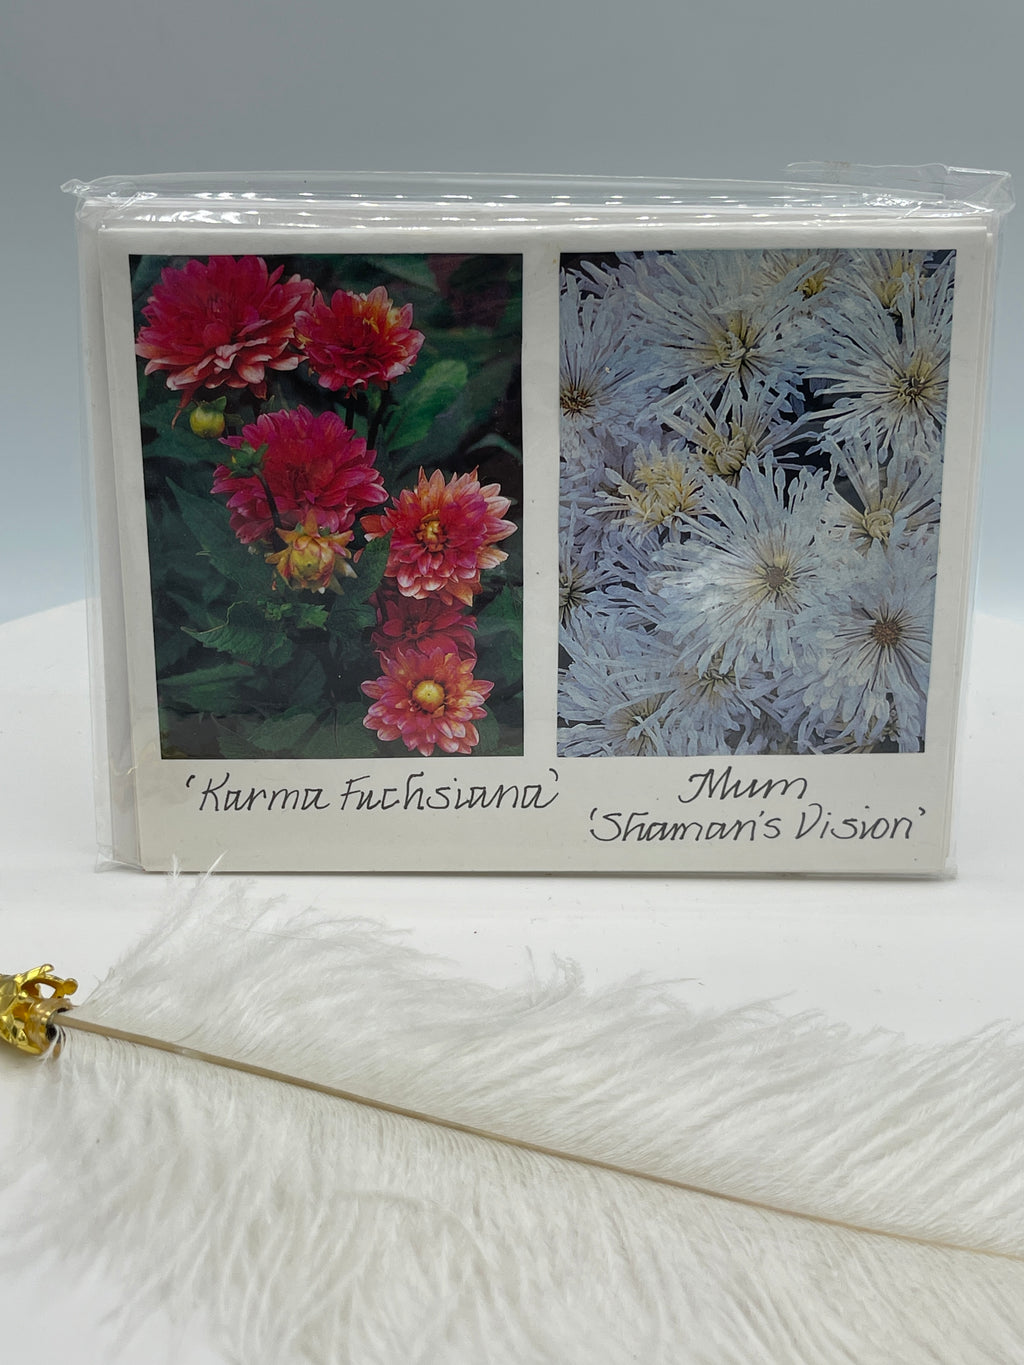 Set of 4 Notecards: Fuchsianal & Other Varieties